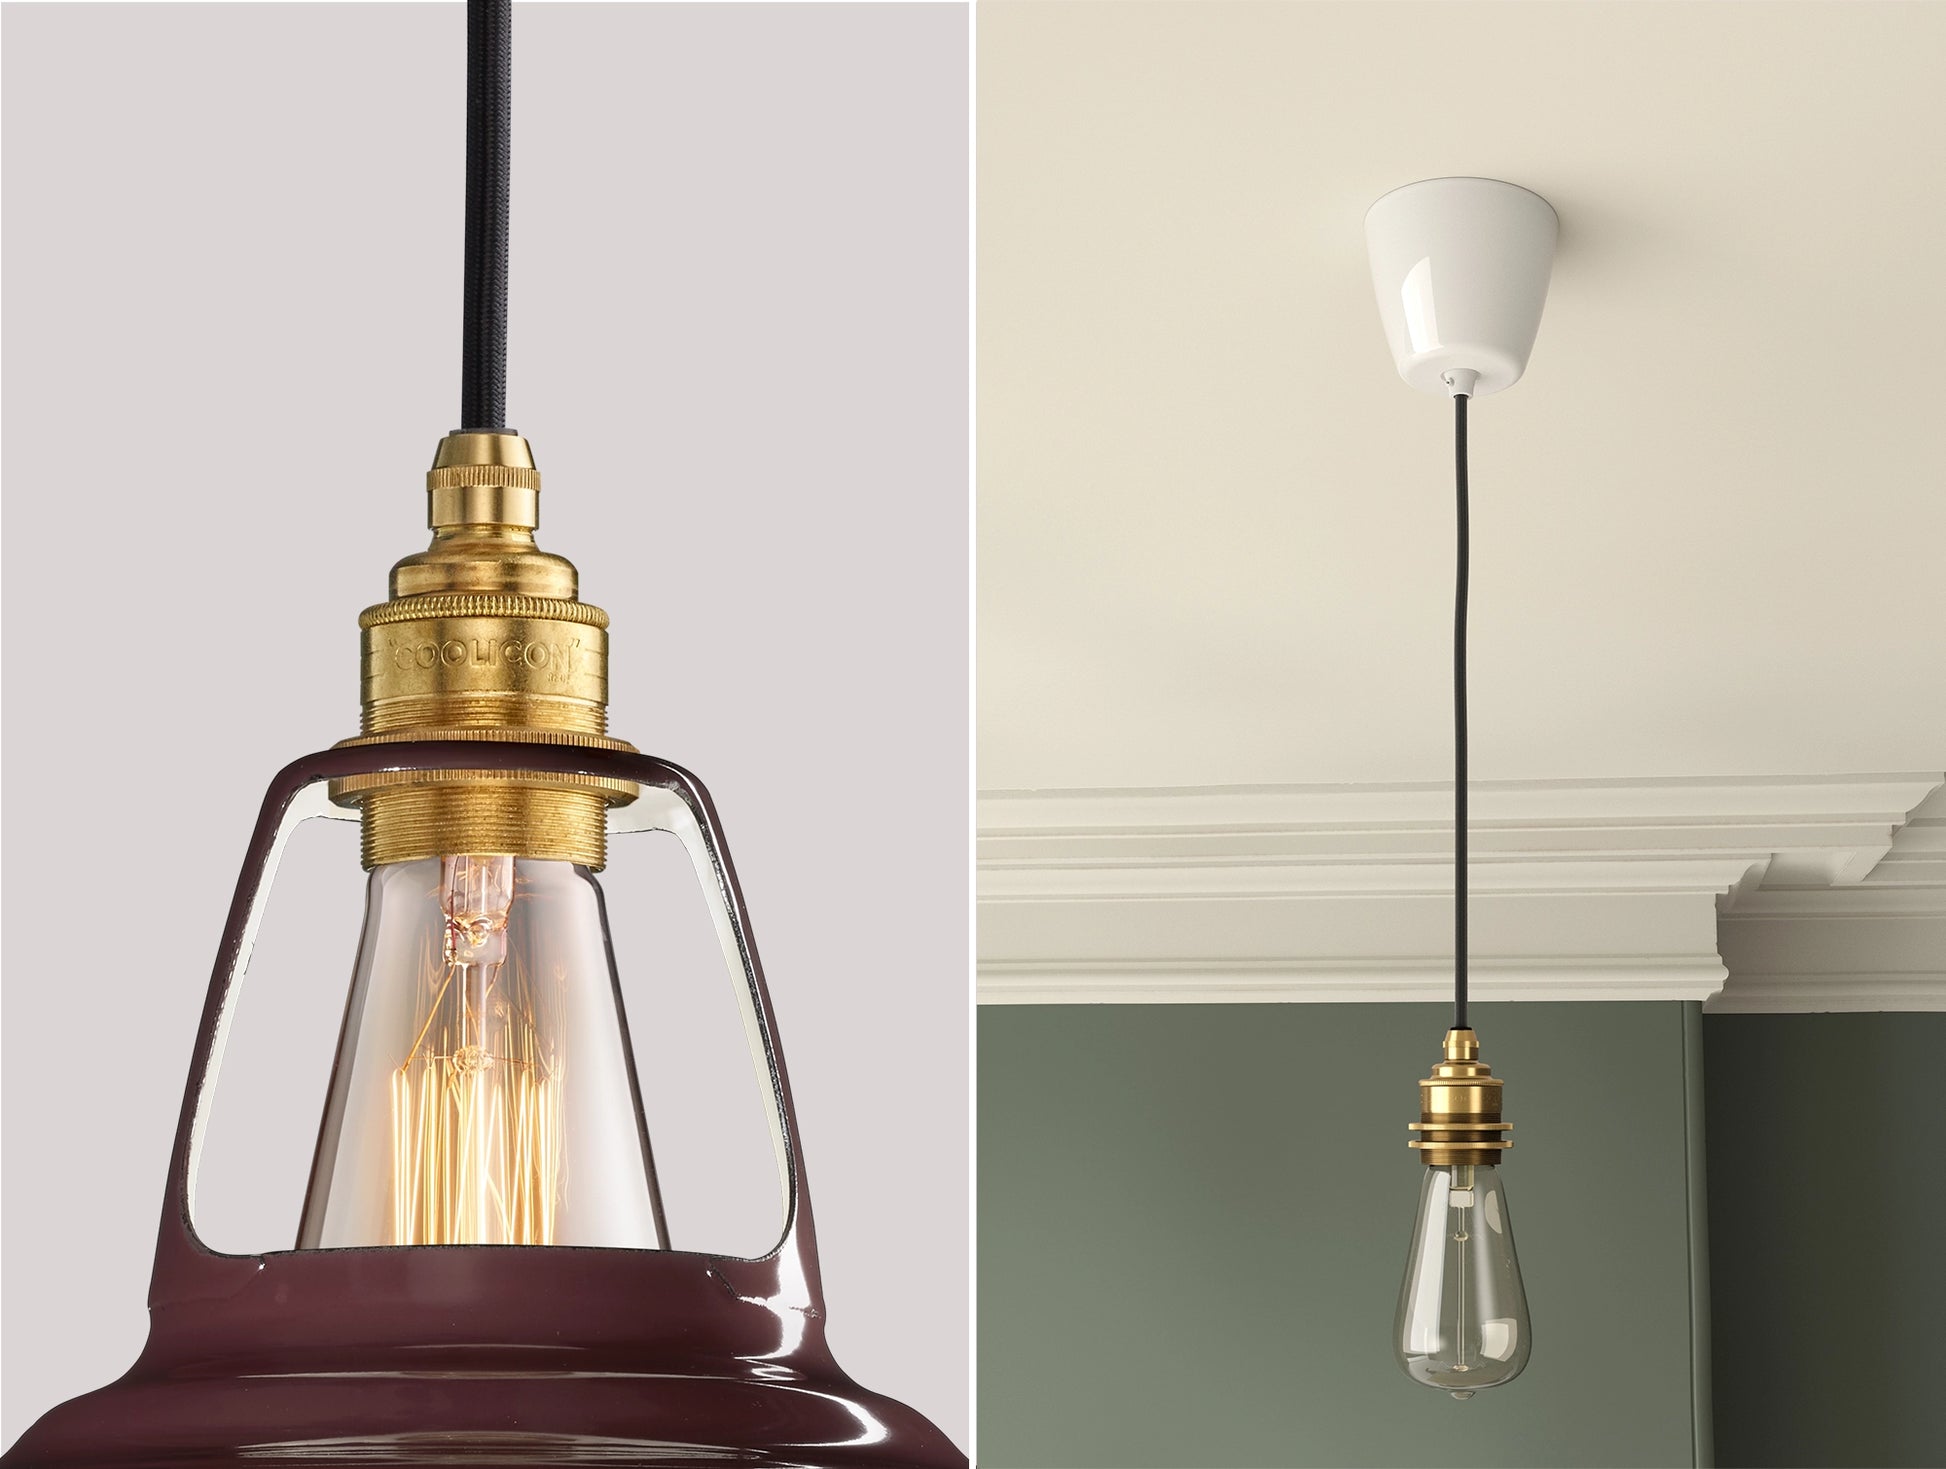 Close up of an E27 Signature Brass suspension set on a Metropolitan lampshade on the left. On the right, an E27 Brass pendant set with a lightbulb is hanging from the ceiling